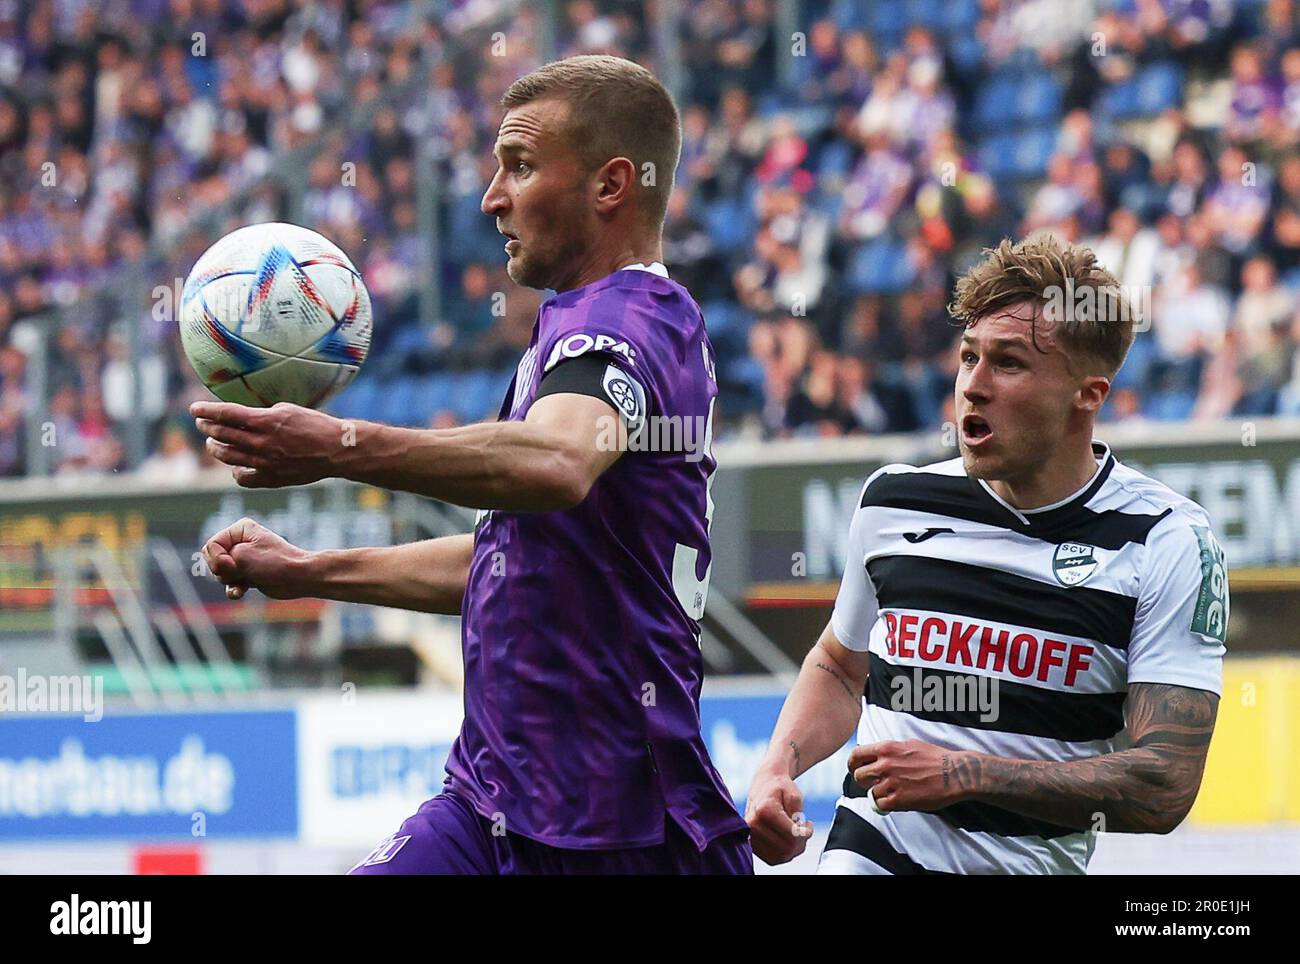 Joel Grodowski of SC Verl controls the ball during the 3. Liga match  News Photo - Getty Images